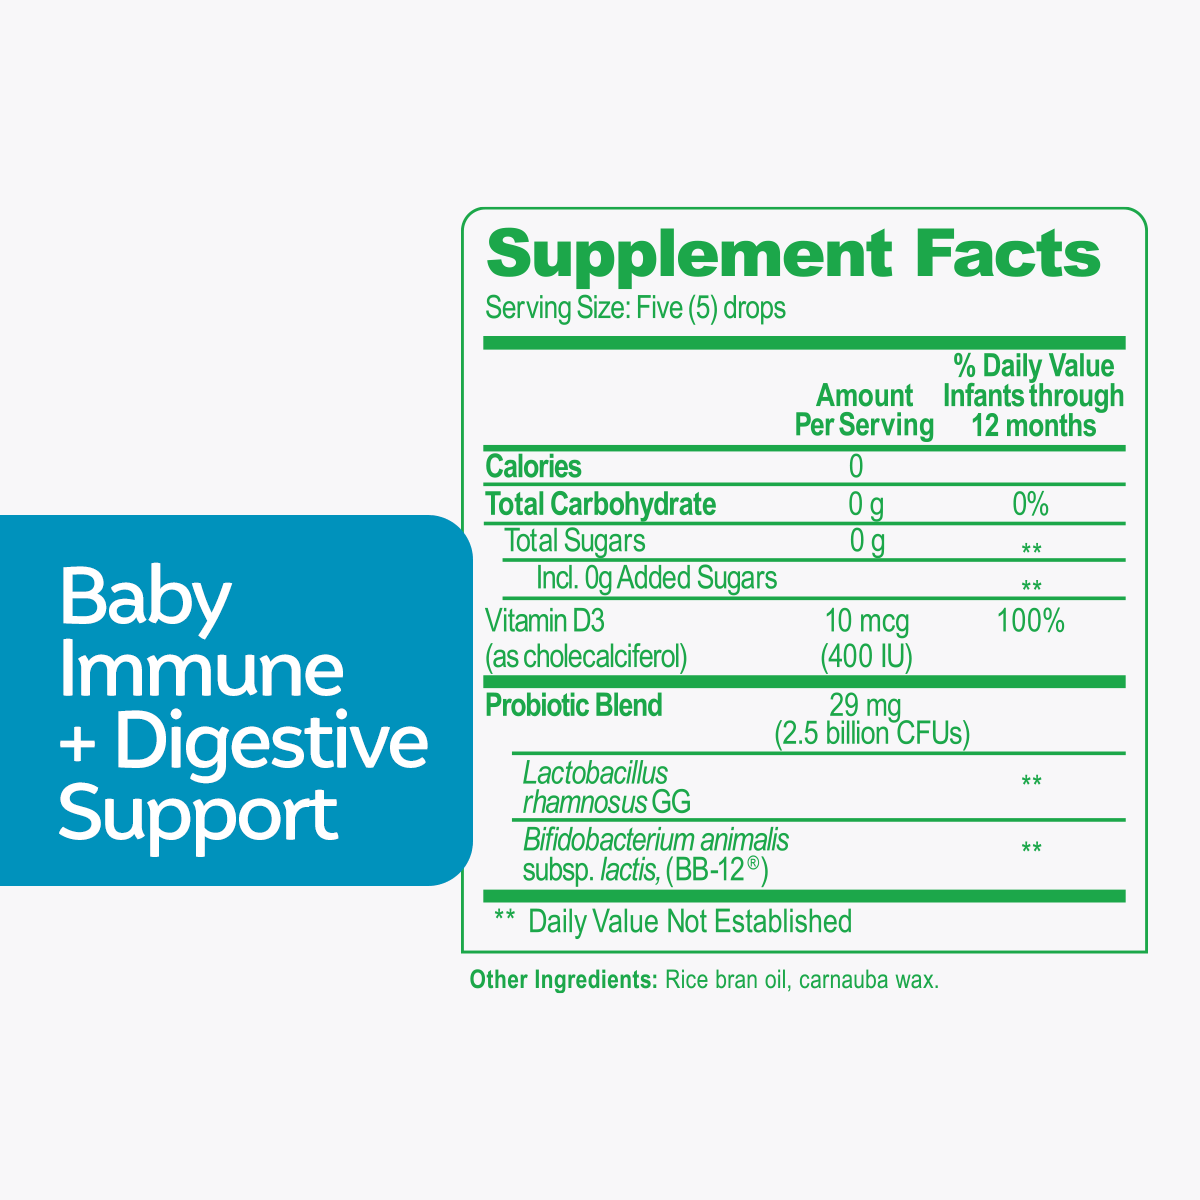 baby immune digestive support supplement facts